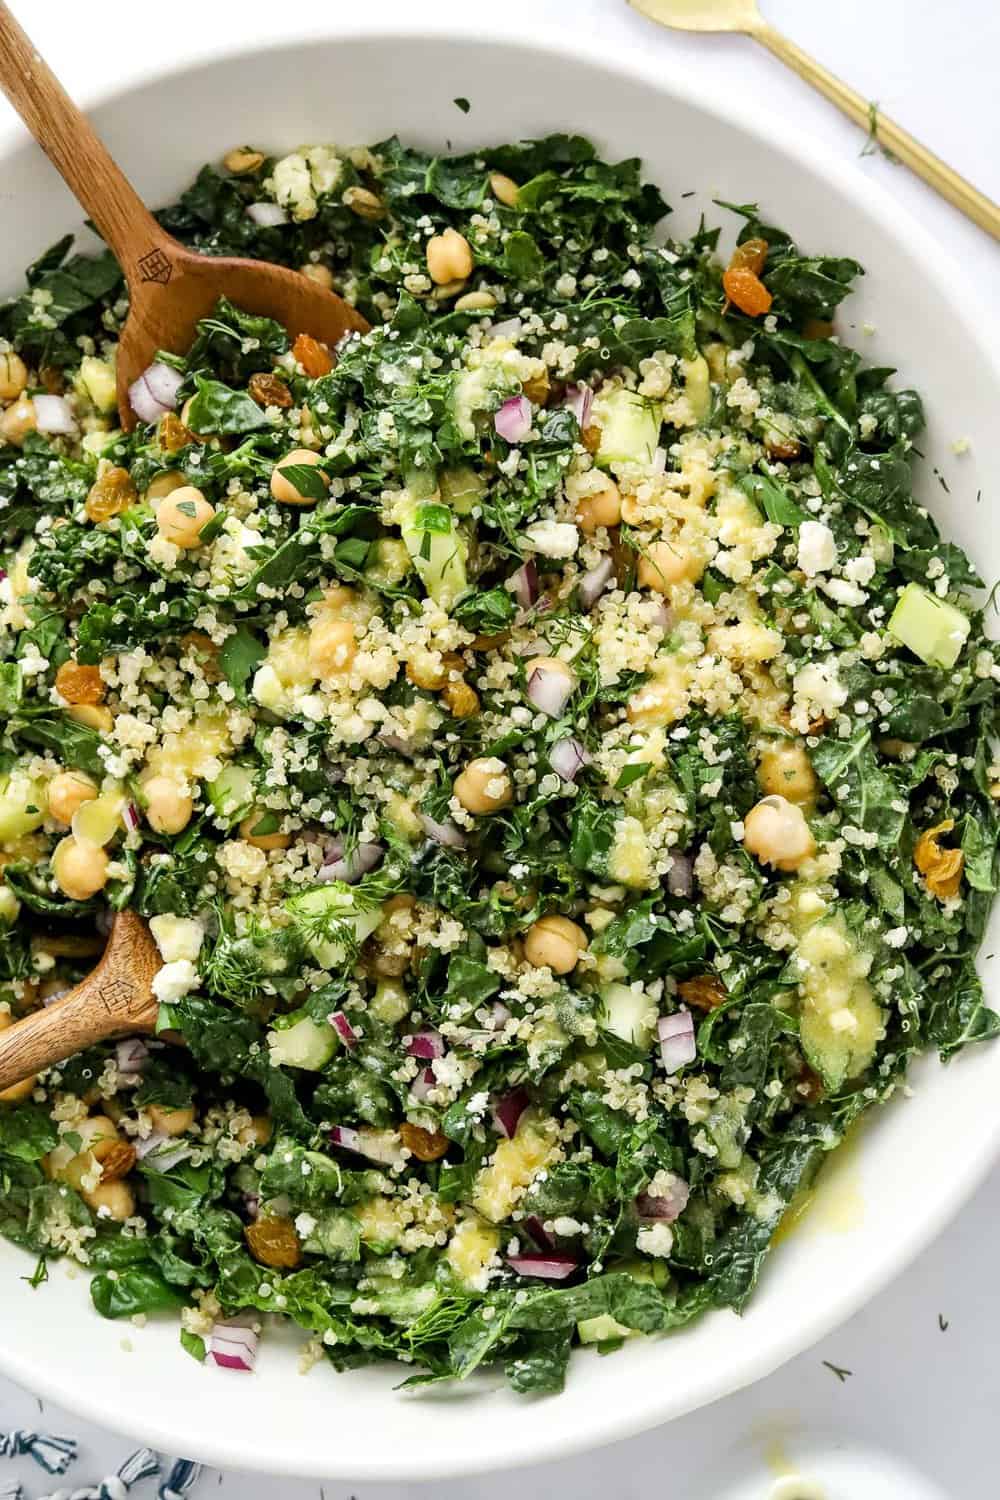 Bowl of chopped kale with quinoa, chickpeas and chopped veggies on it with dressing pour over it with wooden serving spoons in it.